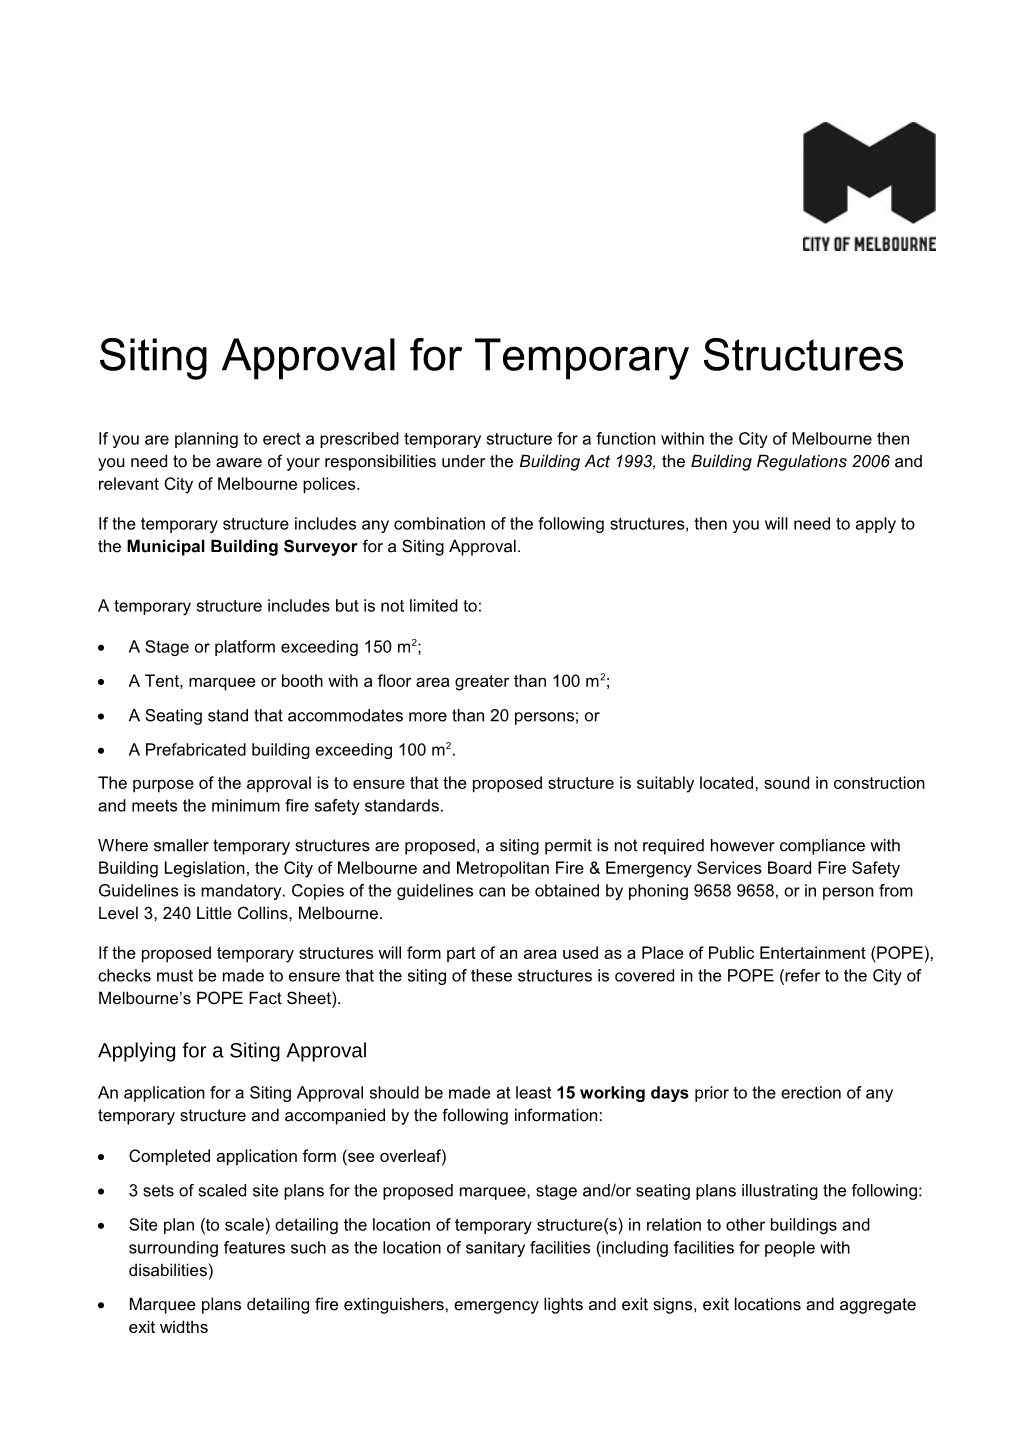 Siting Approval for Temporary Structures - Fact Sheet